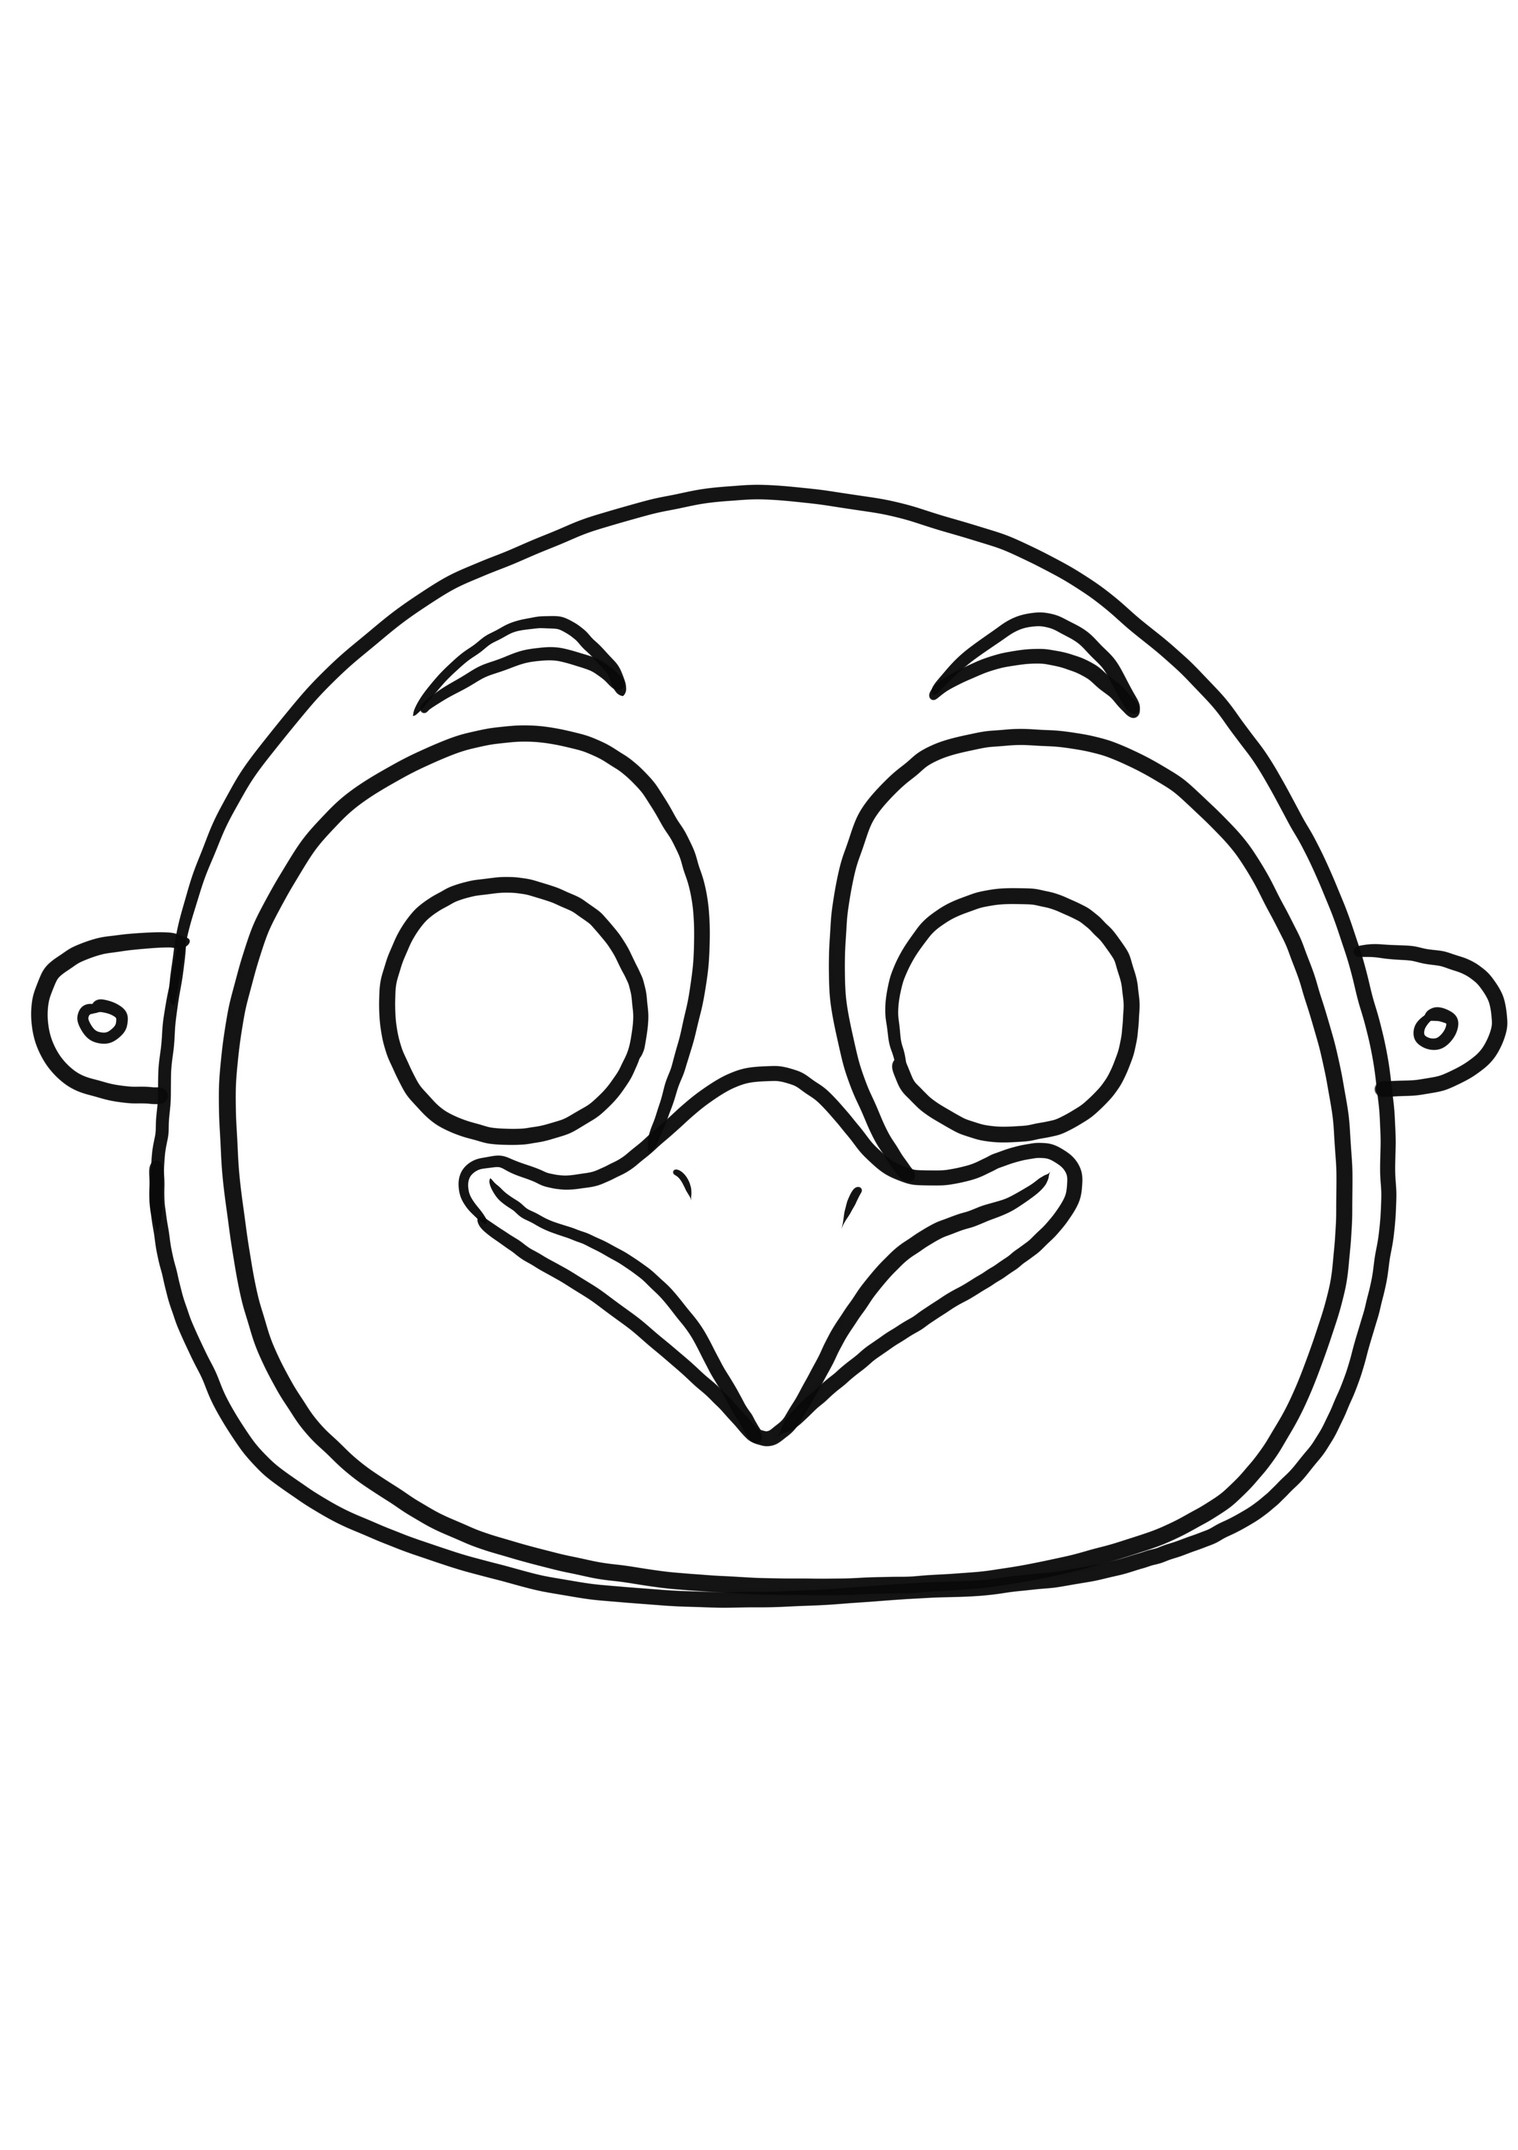 Penguin Mask coloring page to cut out